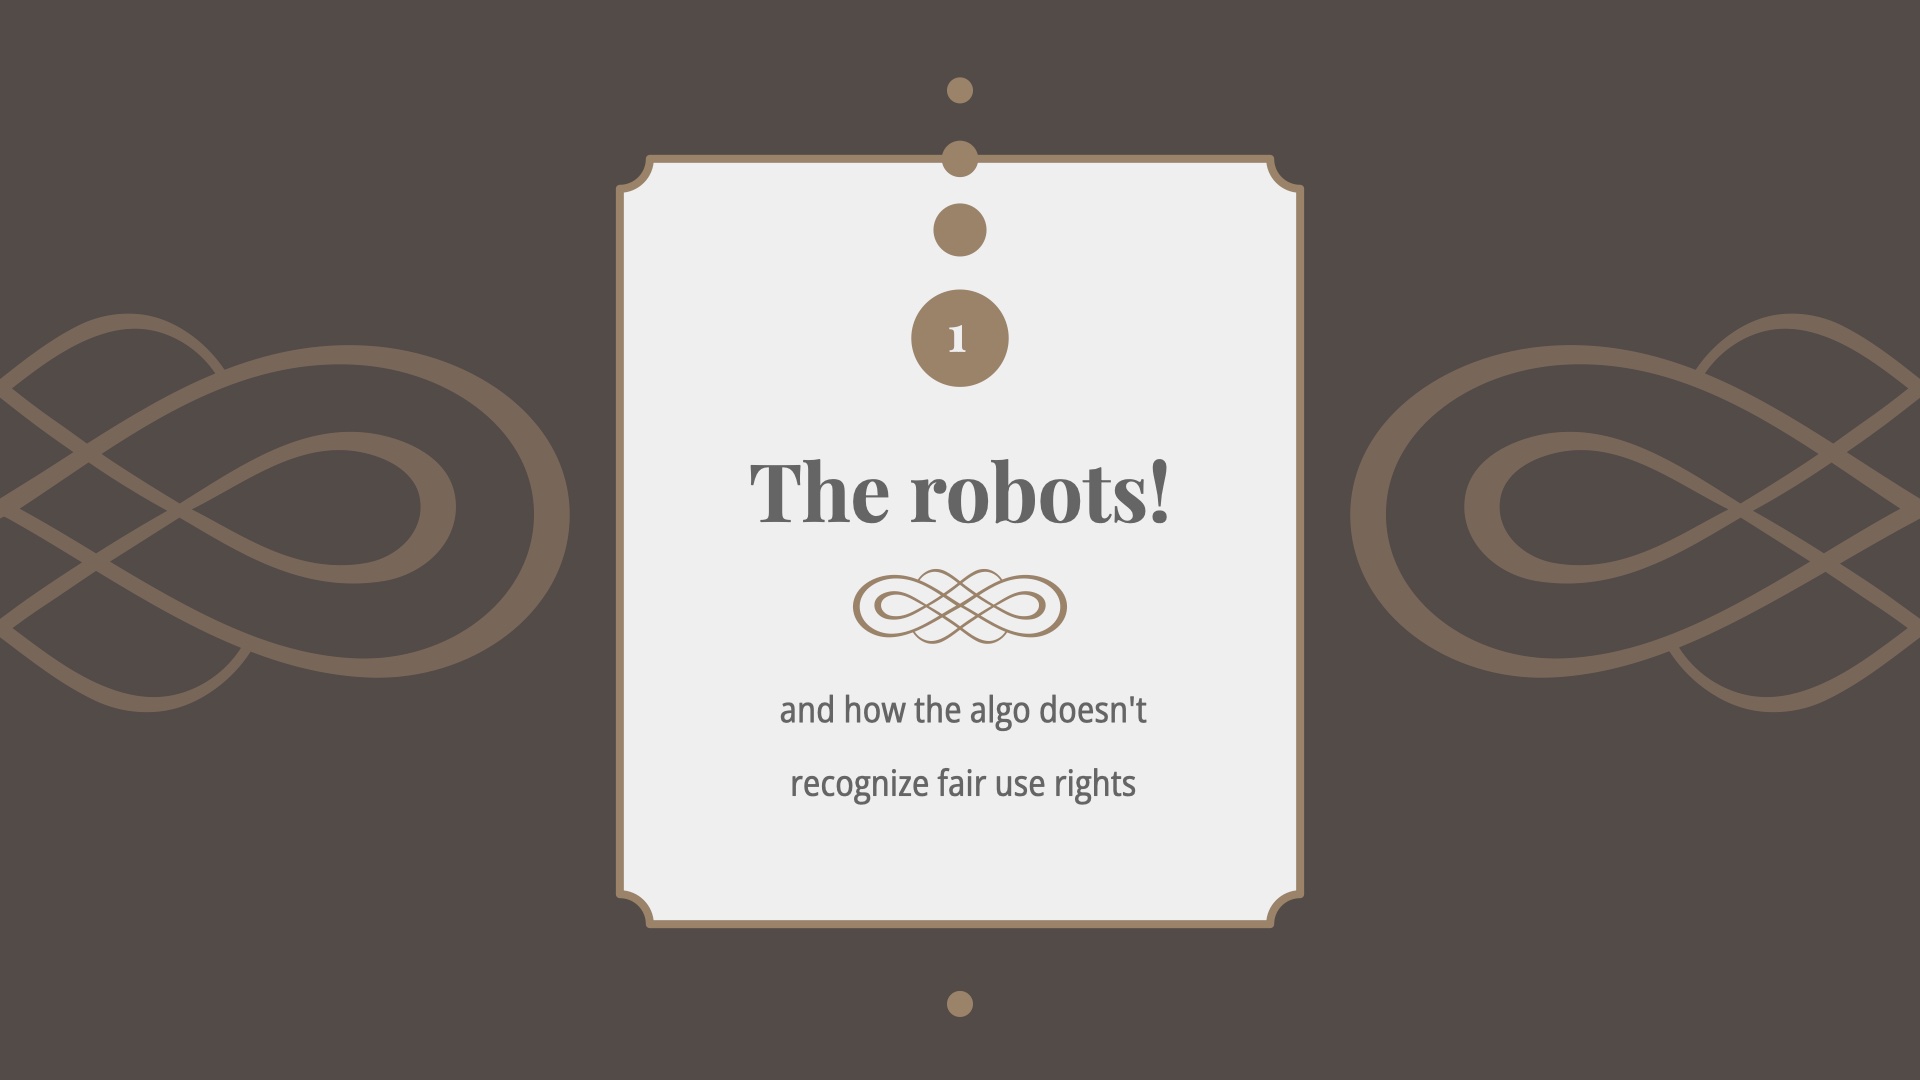 Title Card 1: The robots and how the algo doesn't recognize fair use rights